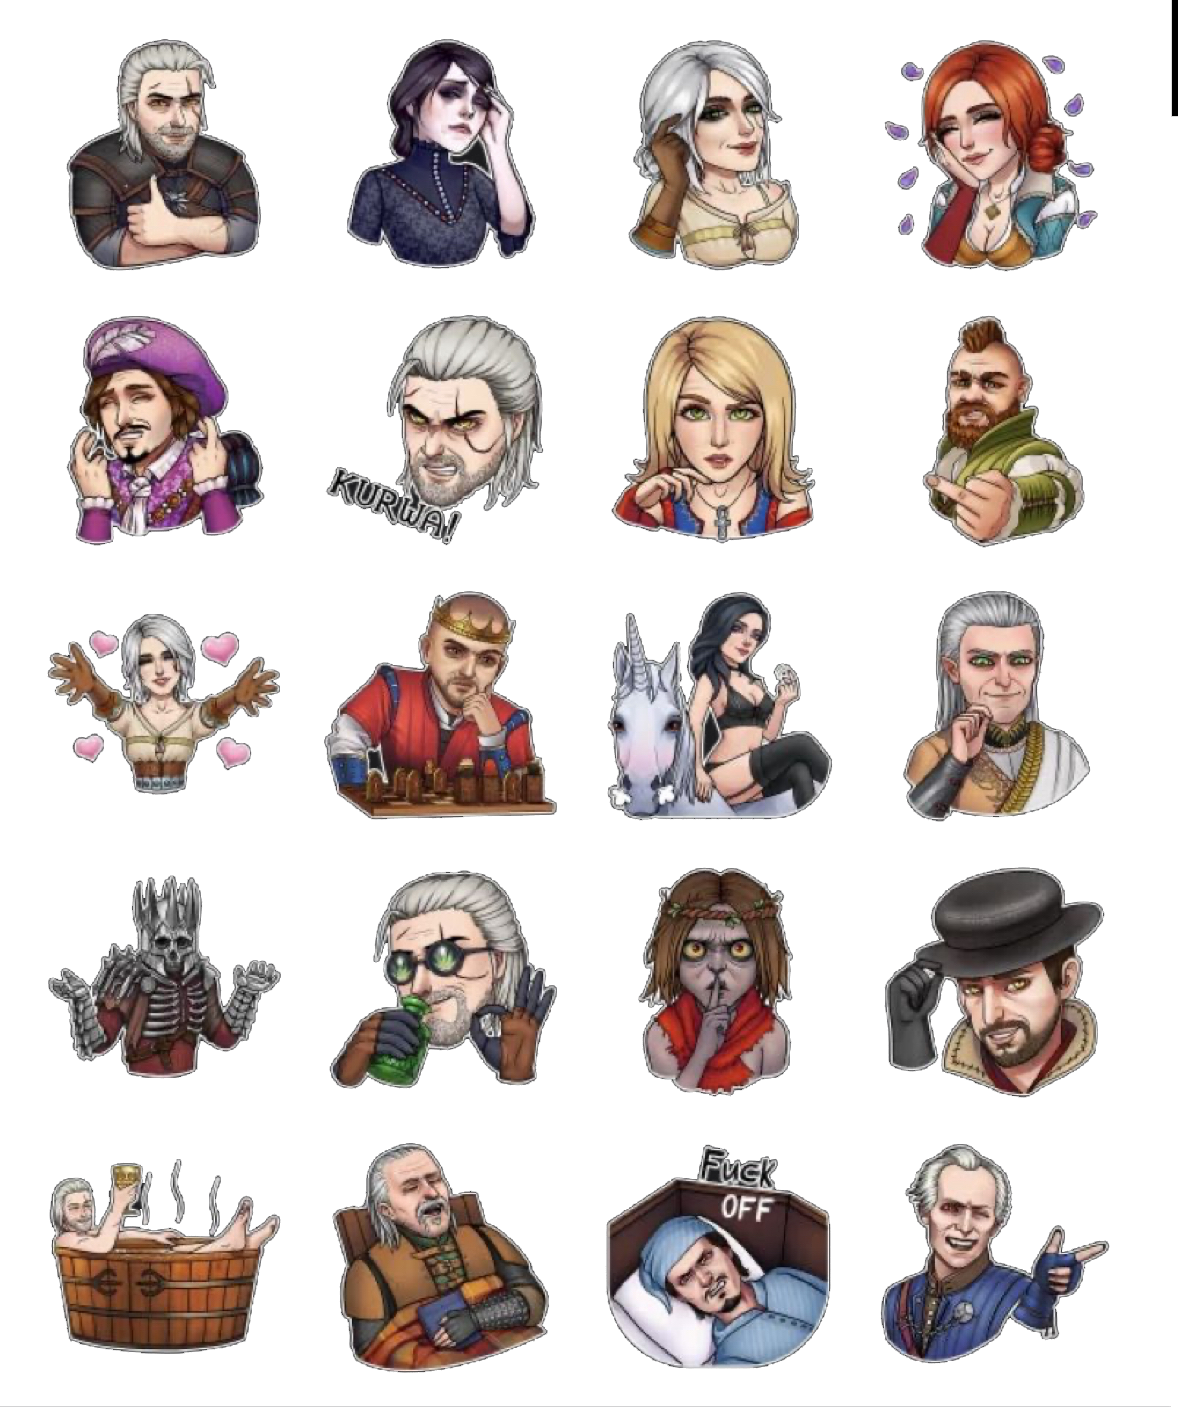 Download The Witcher Telegram stickers for free